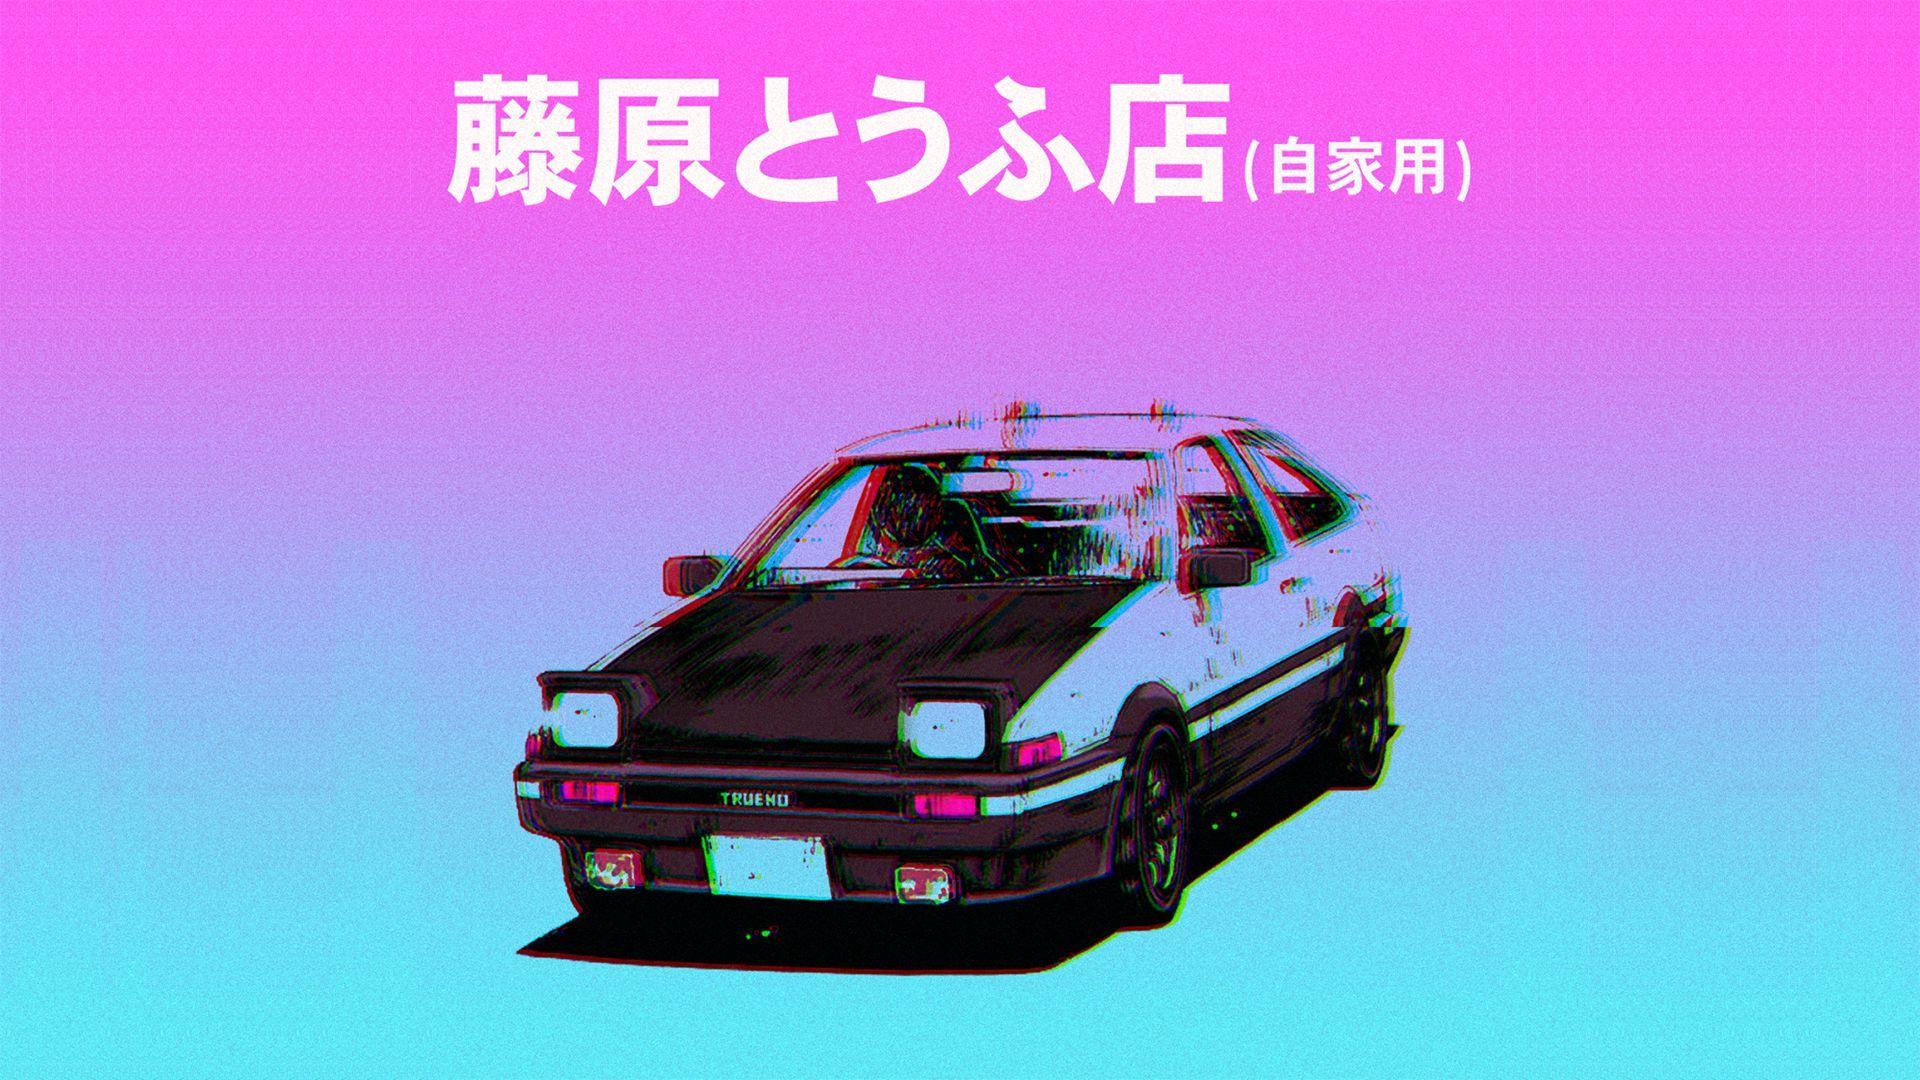 Jdm Aesthetic Wallpaper Pc Pin On Classic Rising Enjoy And Share